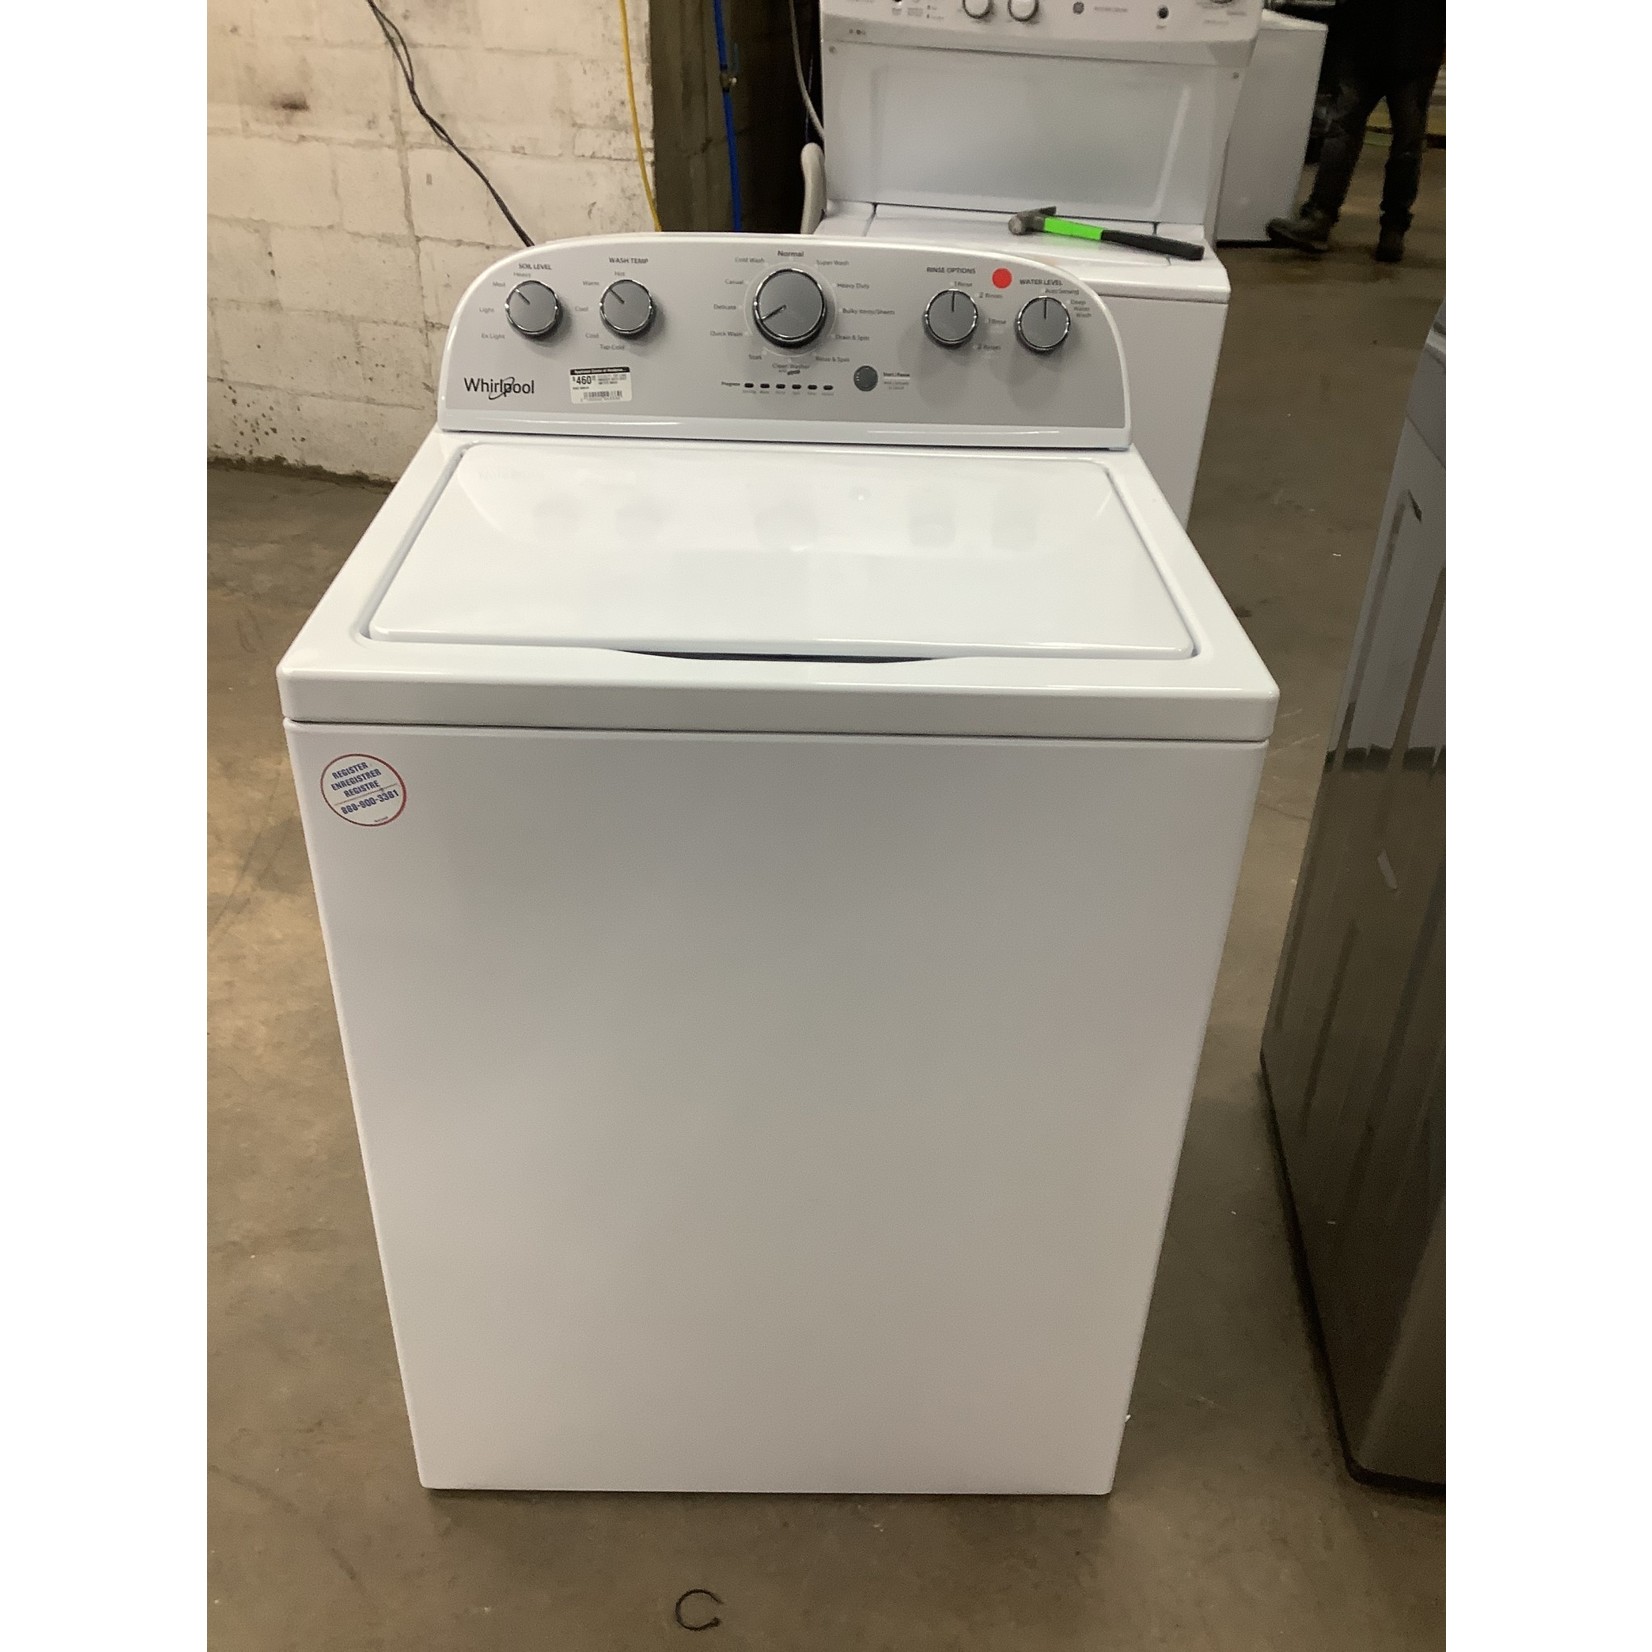 Whirlpool 3.5 CU.FT. TOP LOAD WASHER WITH DEEP WATER WASH